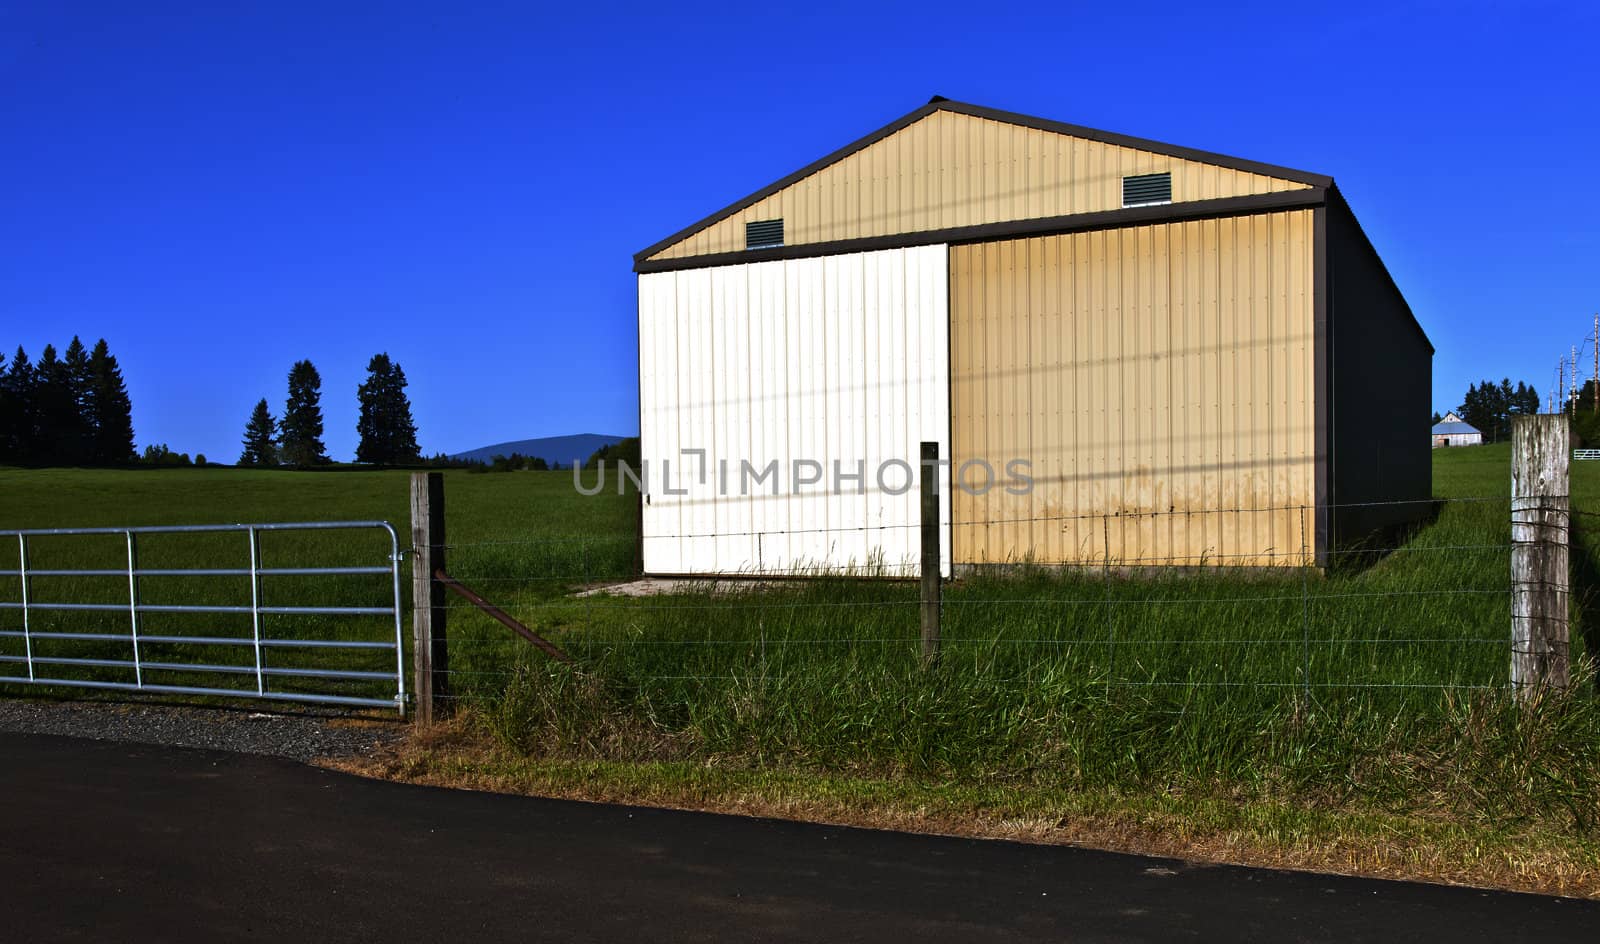 Large storage shed in a field Oregon.